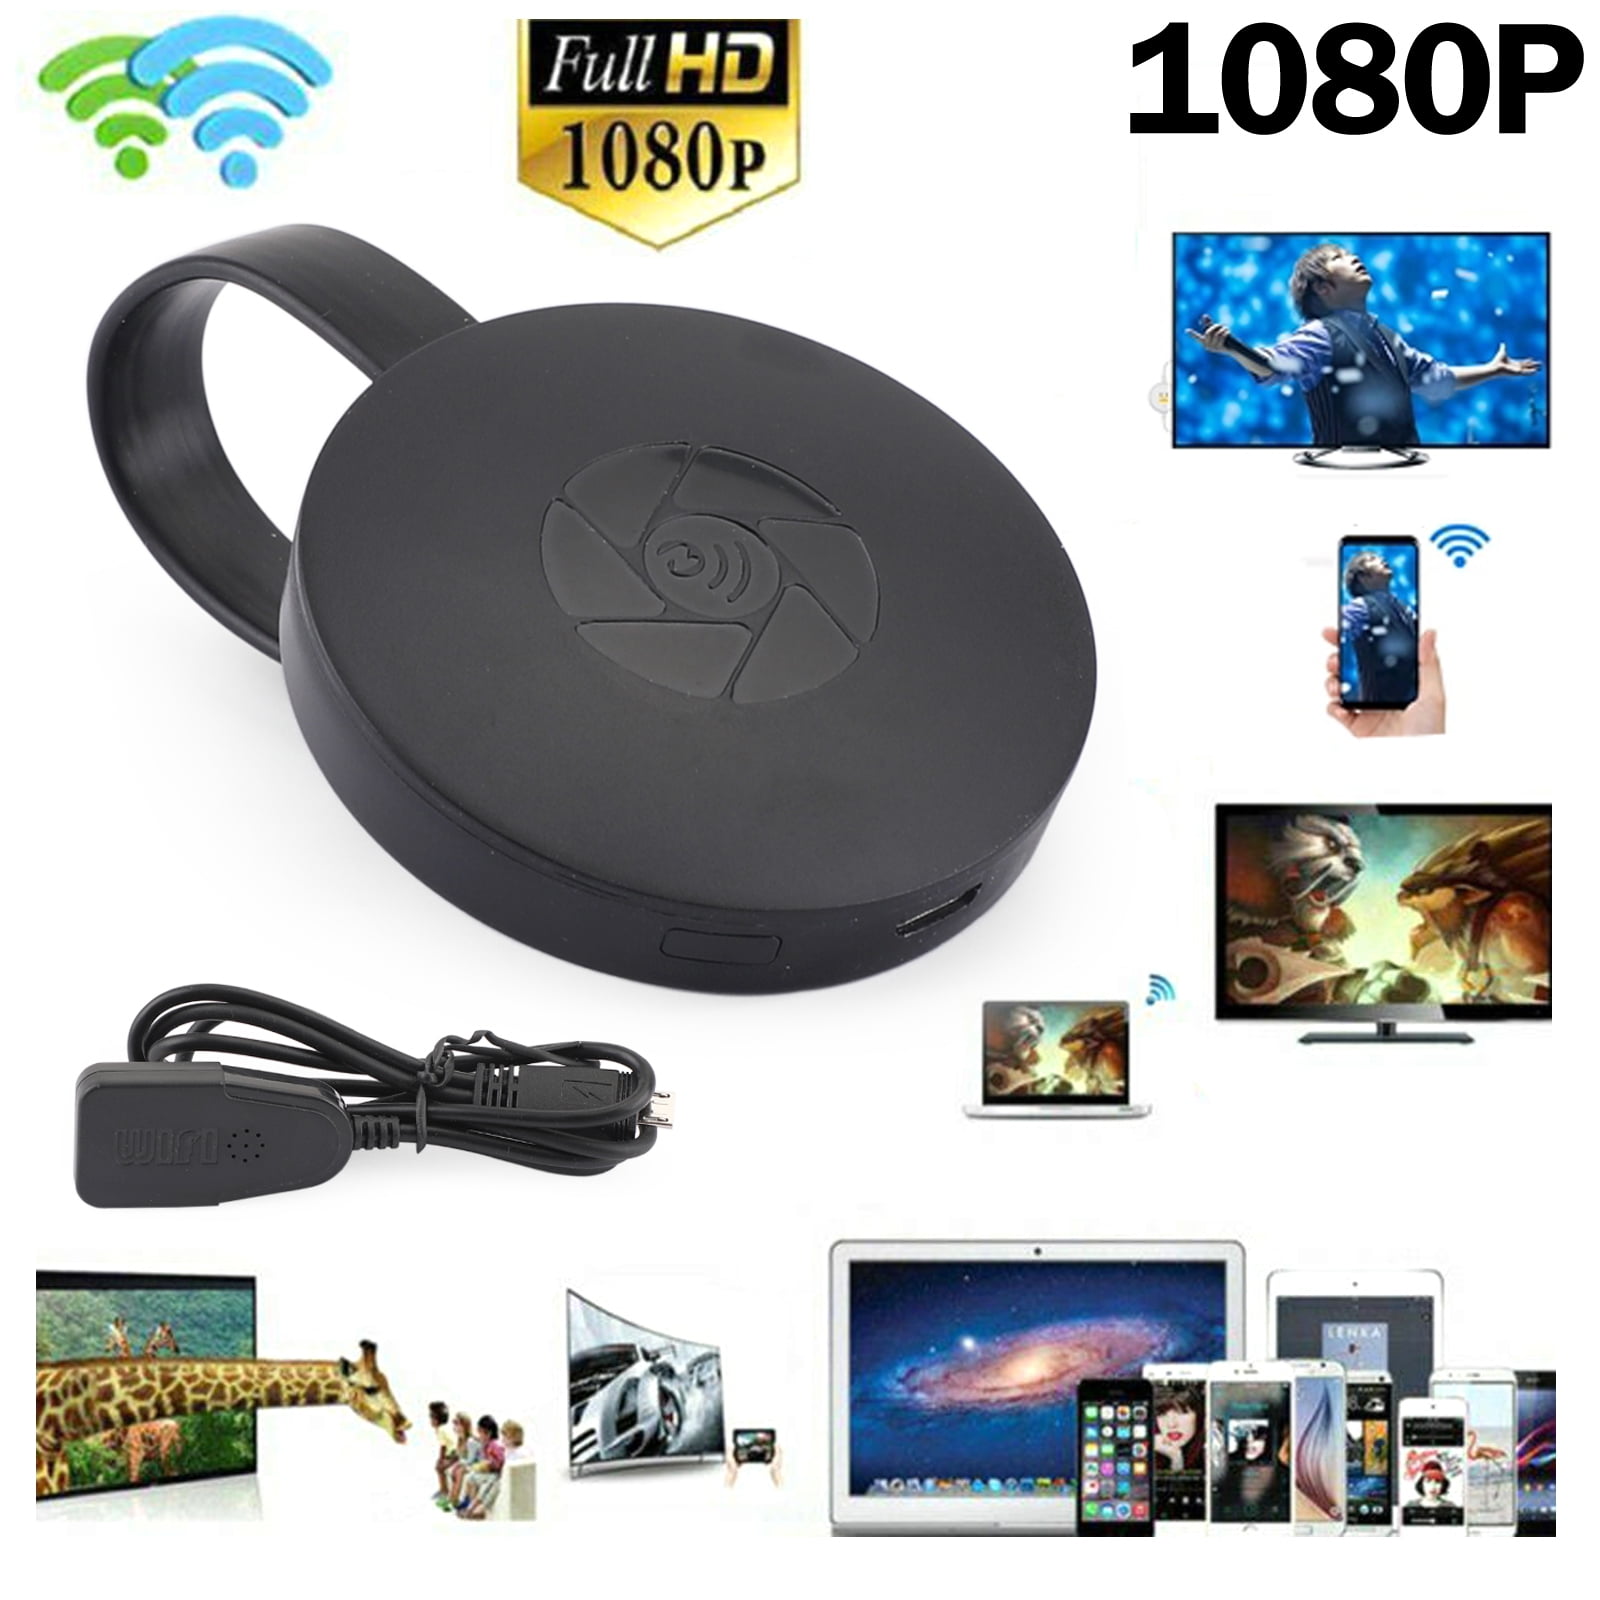 Dongle daffichage sans Fil 4K HDR WiFi Display Dongle Adaptateur 1080P TV Stick Streaming Chromecast Netflix Google Home Youtube Miracast Airplay pour Android/iOS/Window/Mac/Projecteur